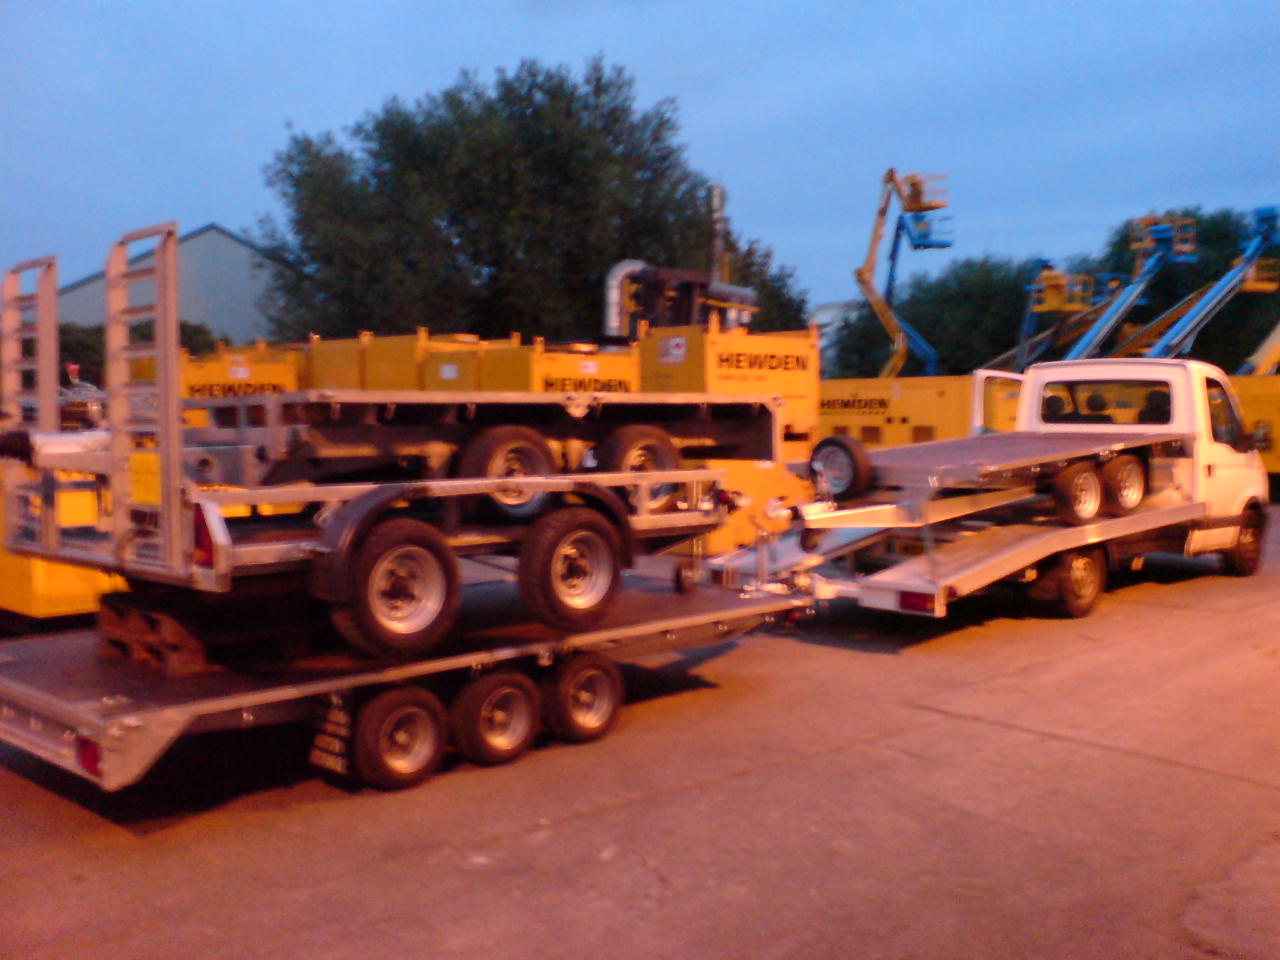 Four Flatbed Trailers on Hire to Hewden PLC.